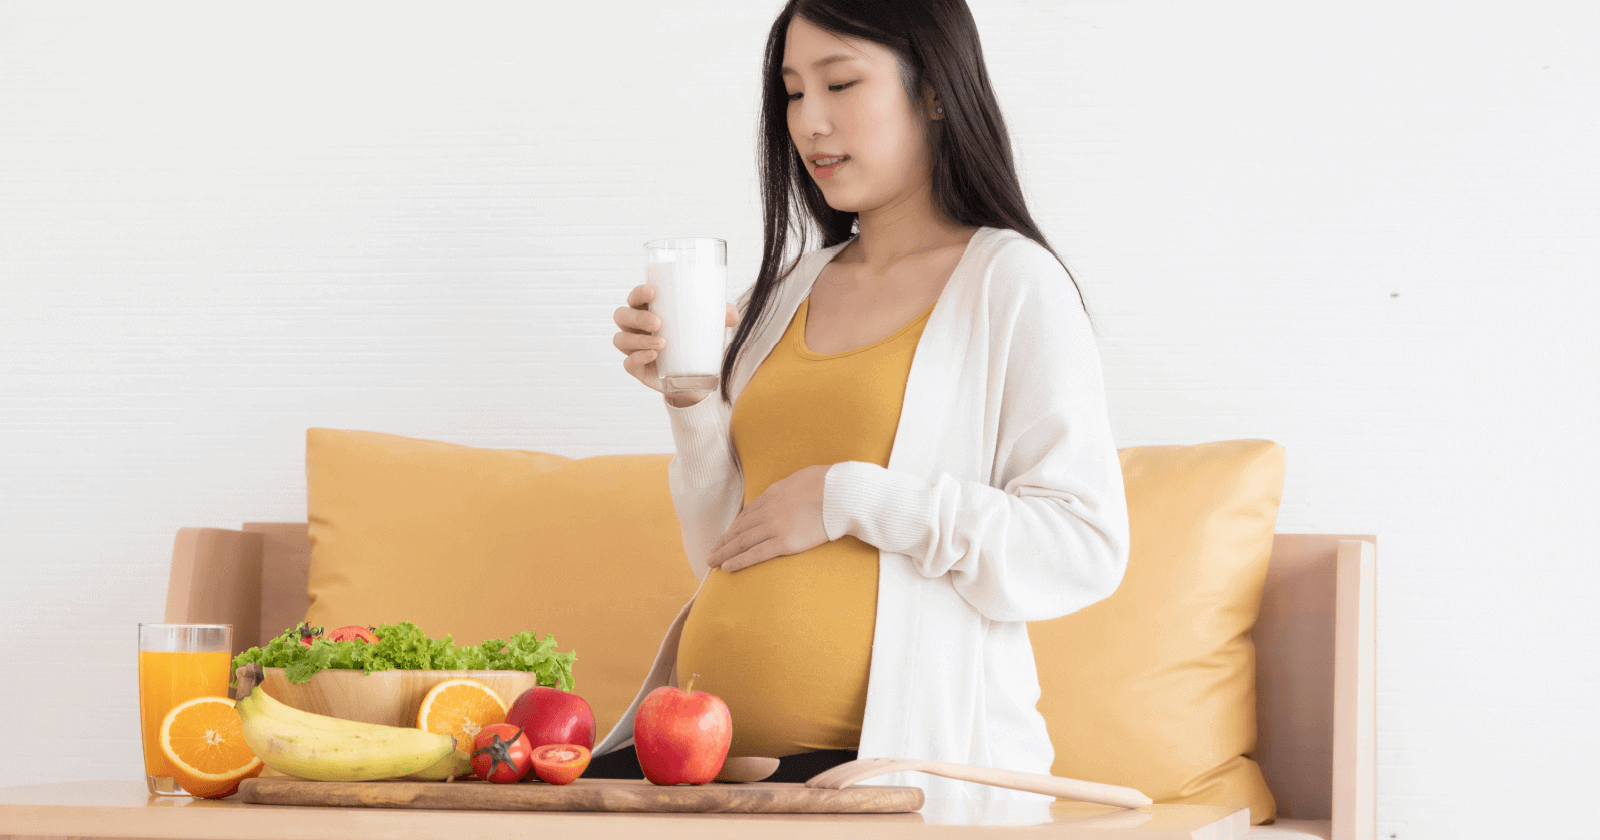 How to get adequate nutrition during pregnancy and breastfeeding
